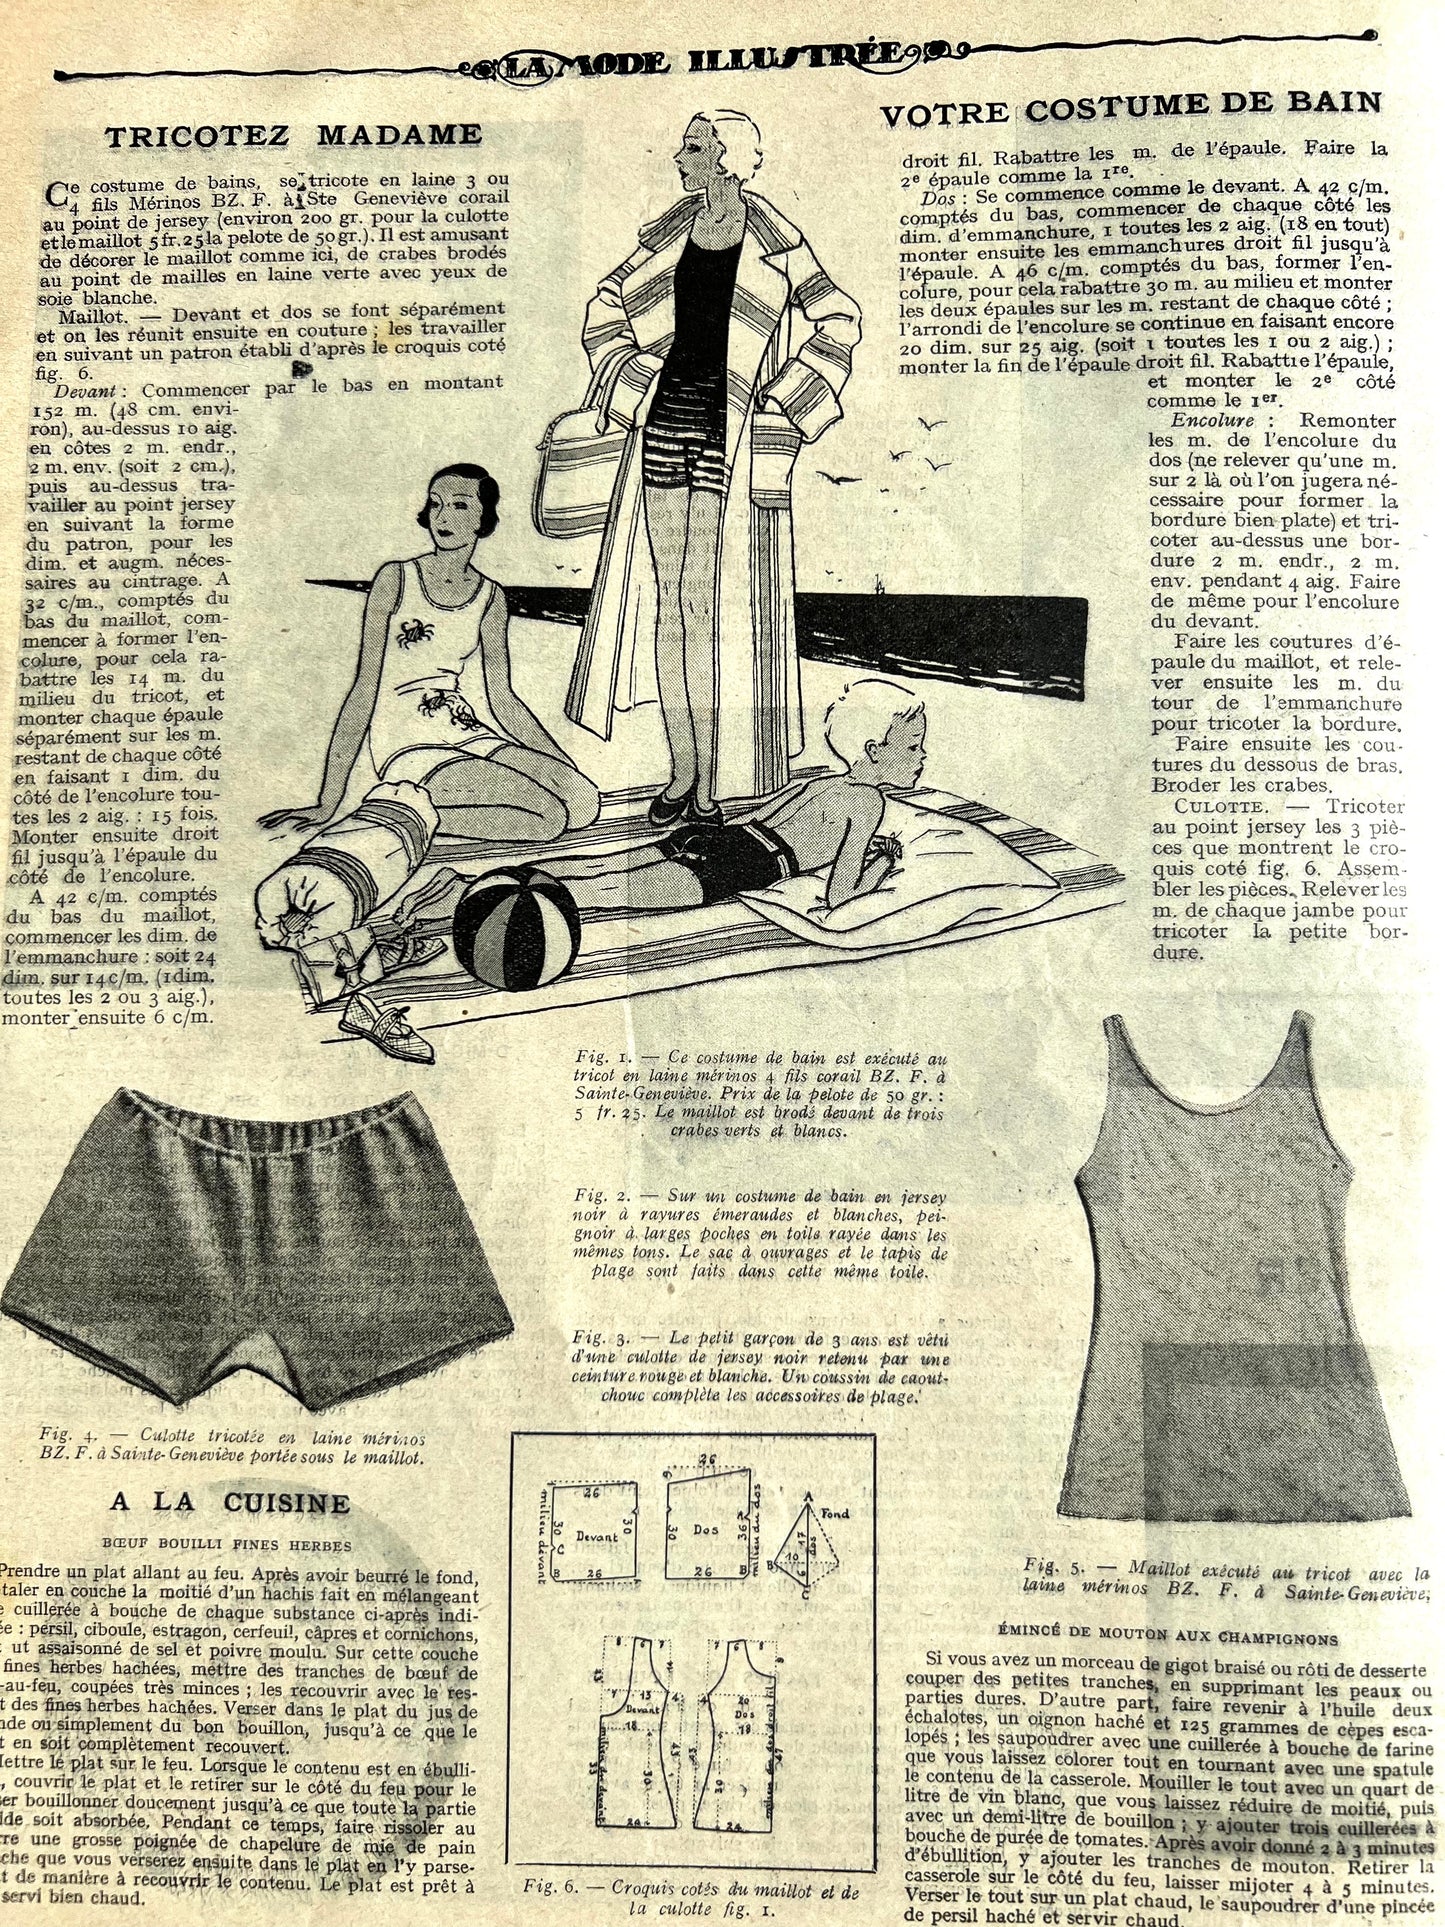 Charming Cover on June 1934 French Fashion Paper La Mode Illustree